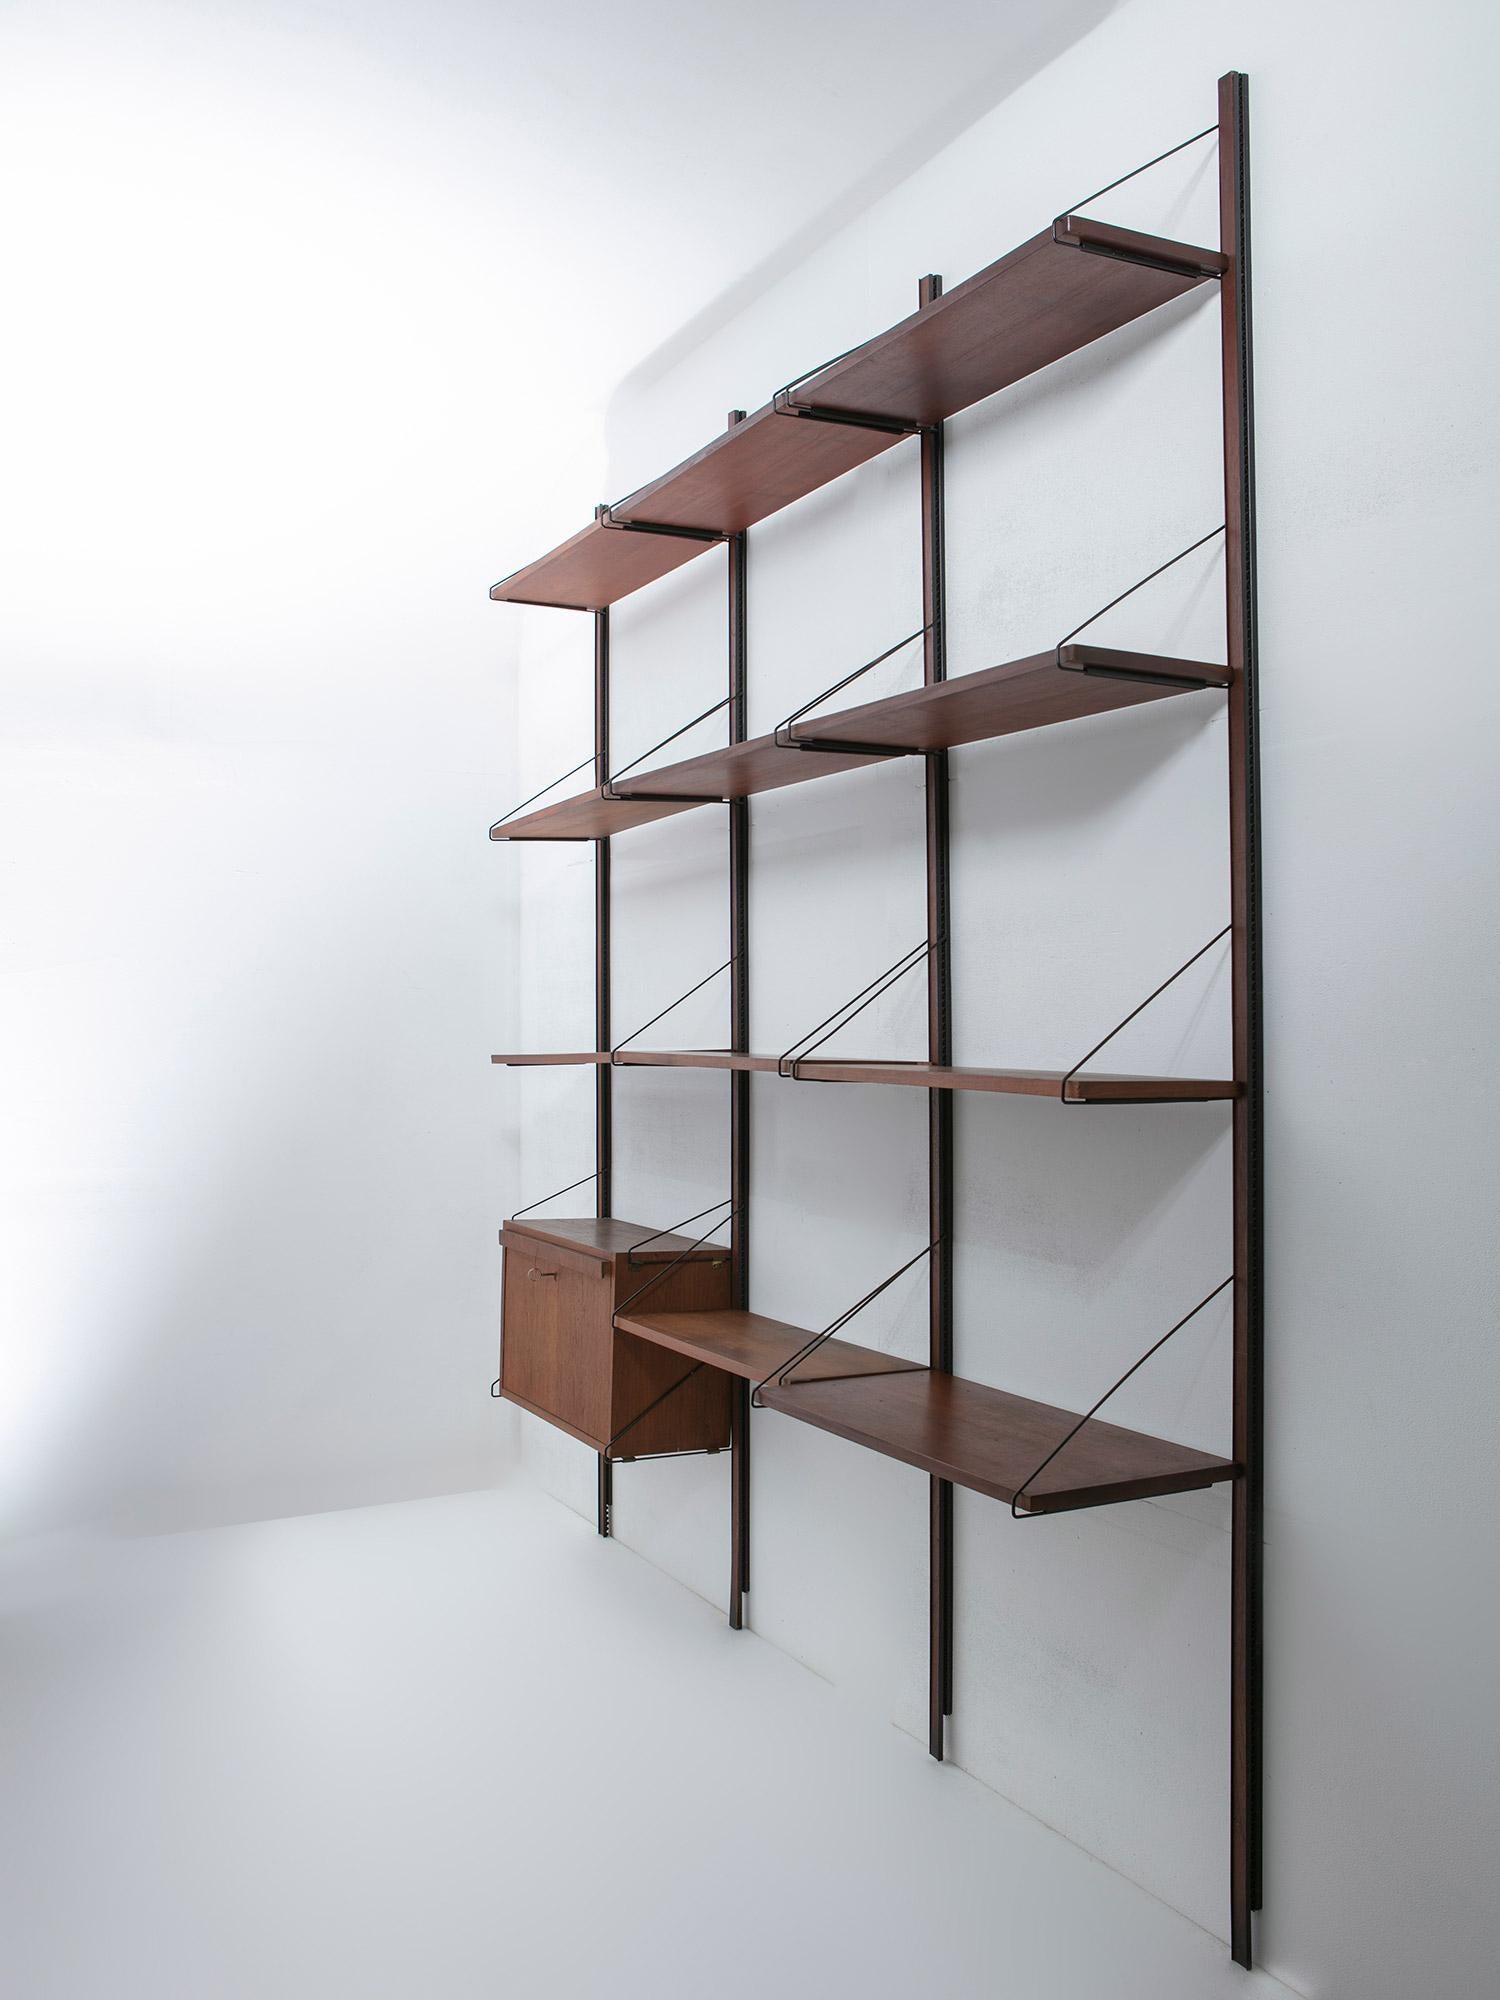 Rare wall bookcase model LP 3 designed by Giorgio Rinaldi for Rima.
Fixed metal uprights with special profiles and wood cover.
Shelves is supported by an ingenious bracket system.